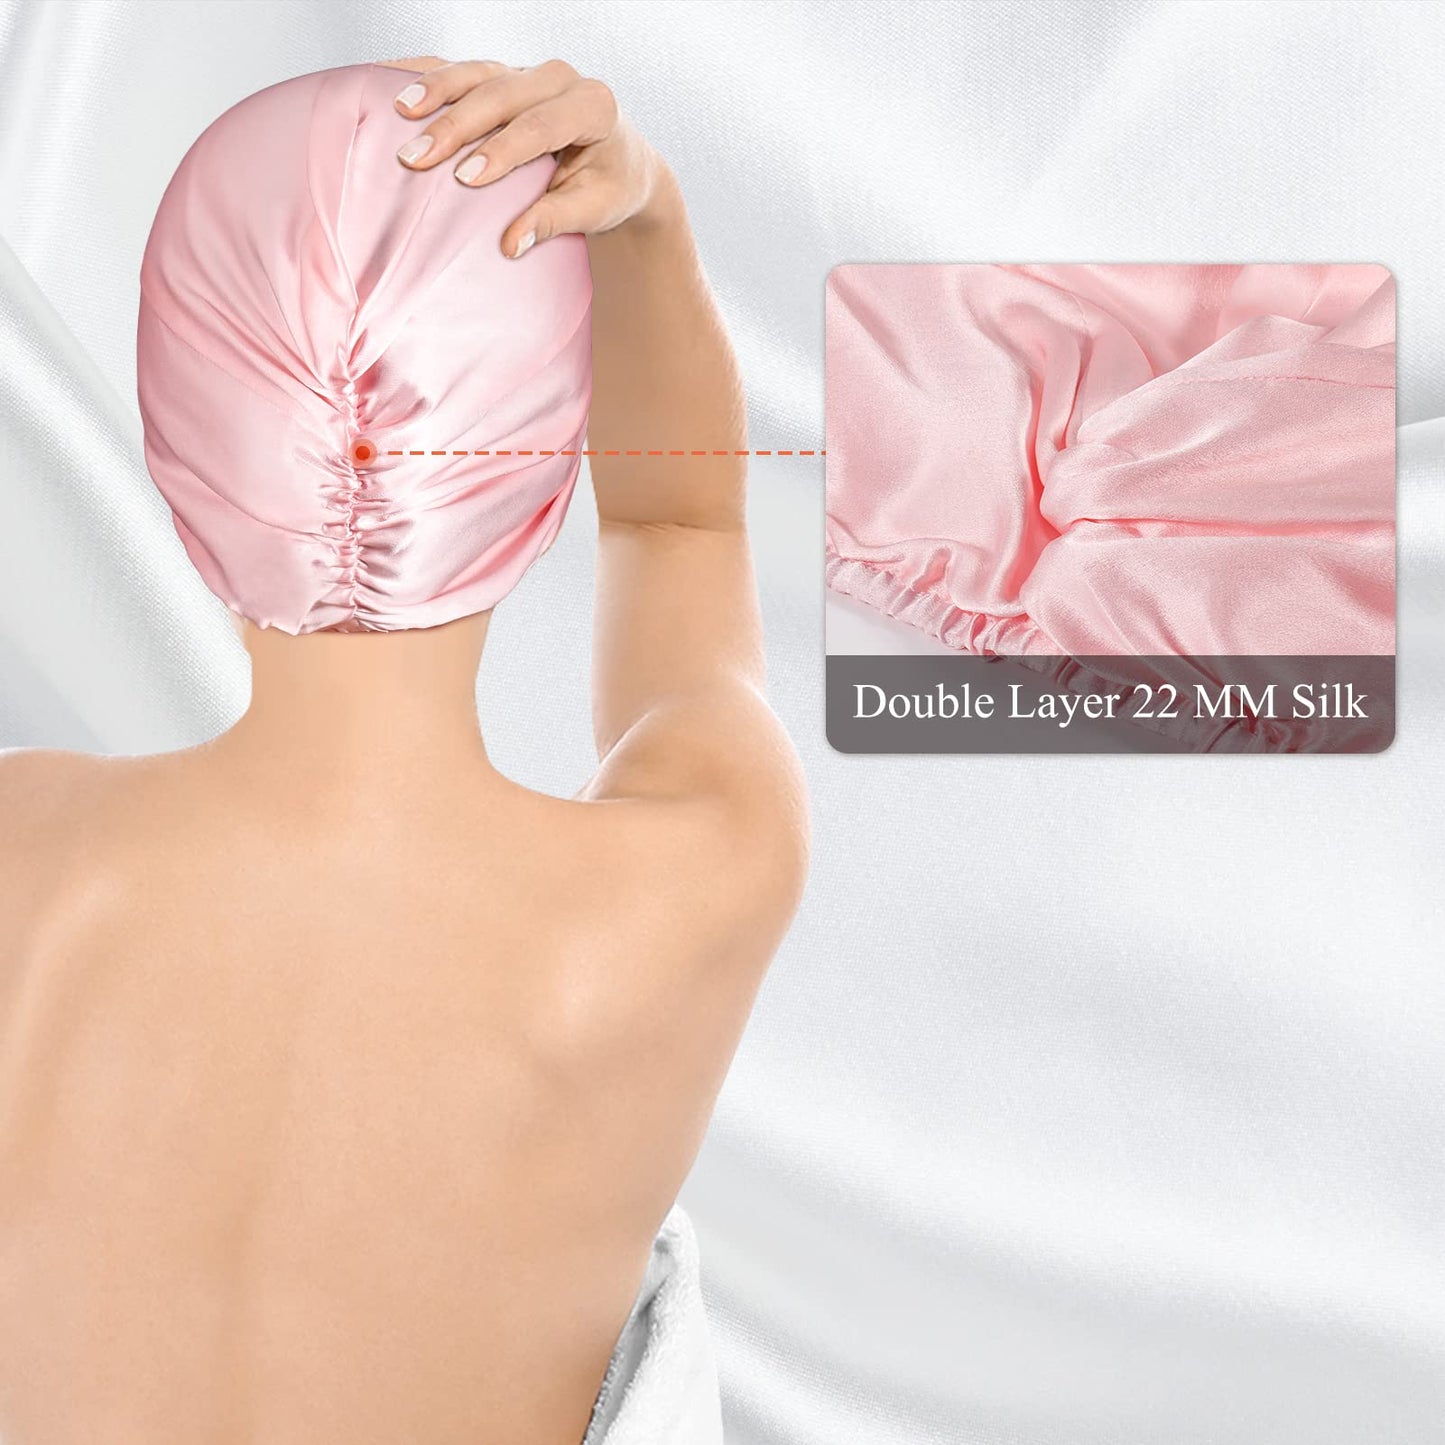 Kenllas 22-Momme 100% Mulberry-Silk Bonnet - Natural Pure Silk Sleep Cap for Women Curly Hair Care Cover with Tie and Elastic Band (Pink - Double Layer)